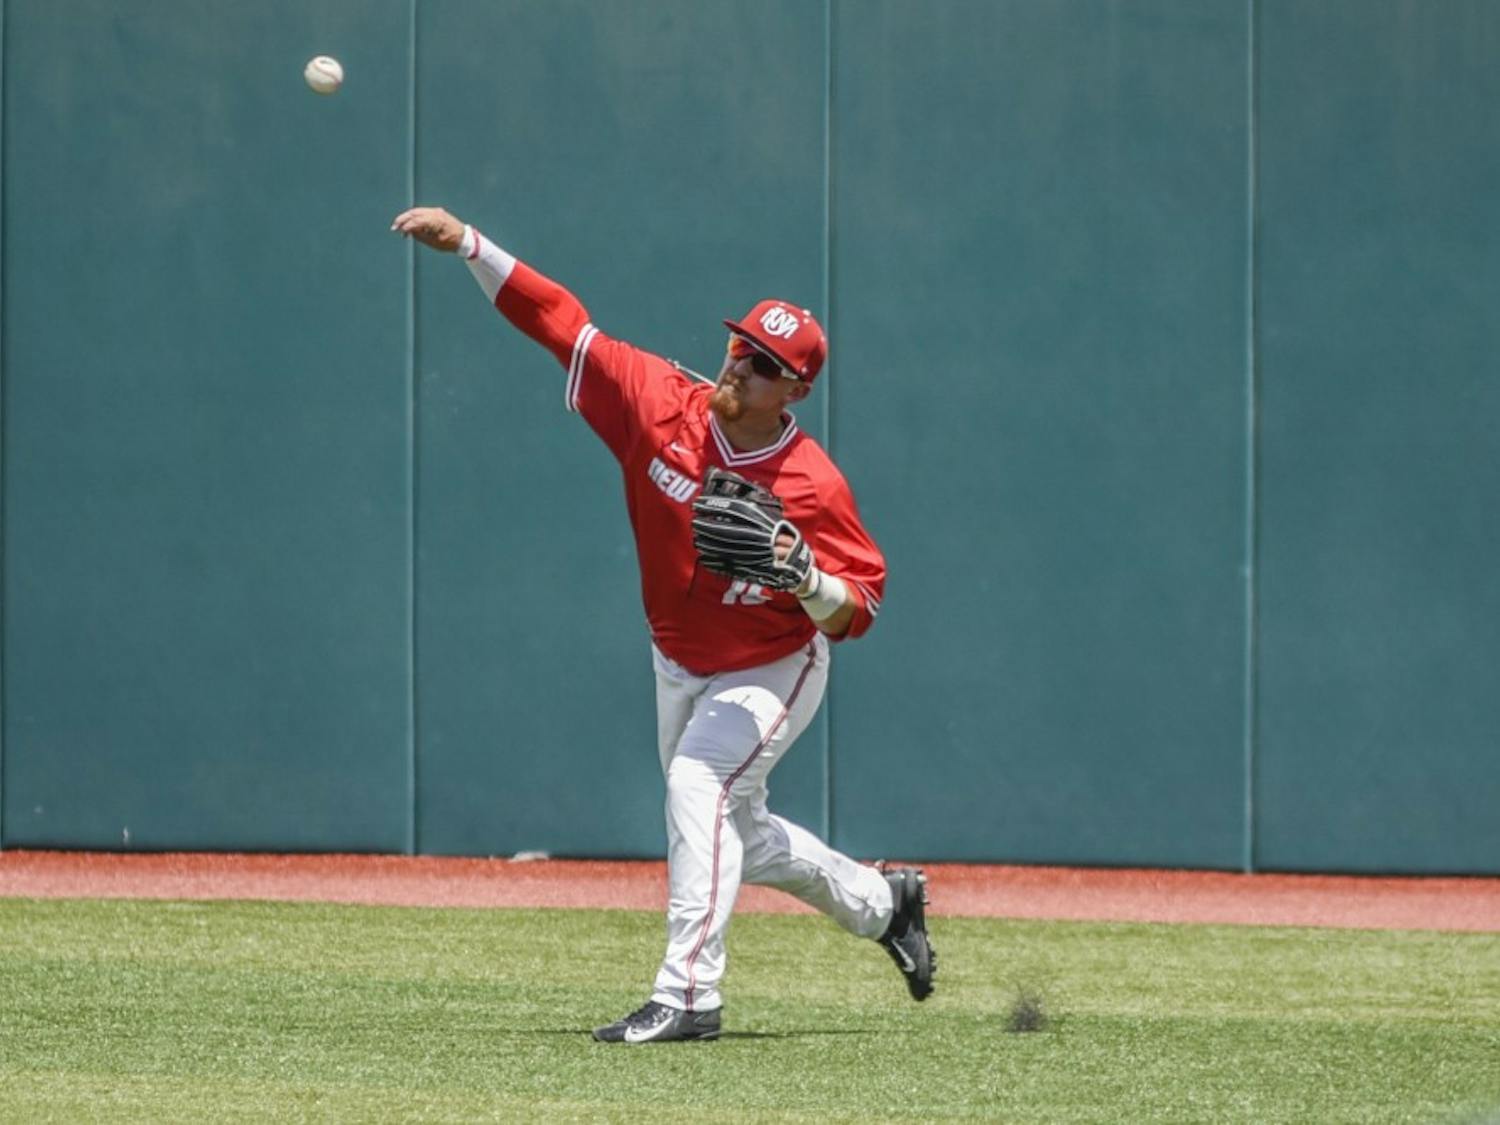 Sophomore Jared Mang launches the ball from the outfield during the Lobos game against Air Force Saturday, May 6, 2017 at Santa Ana Star Field.&nbsp;